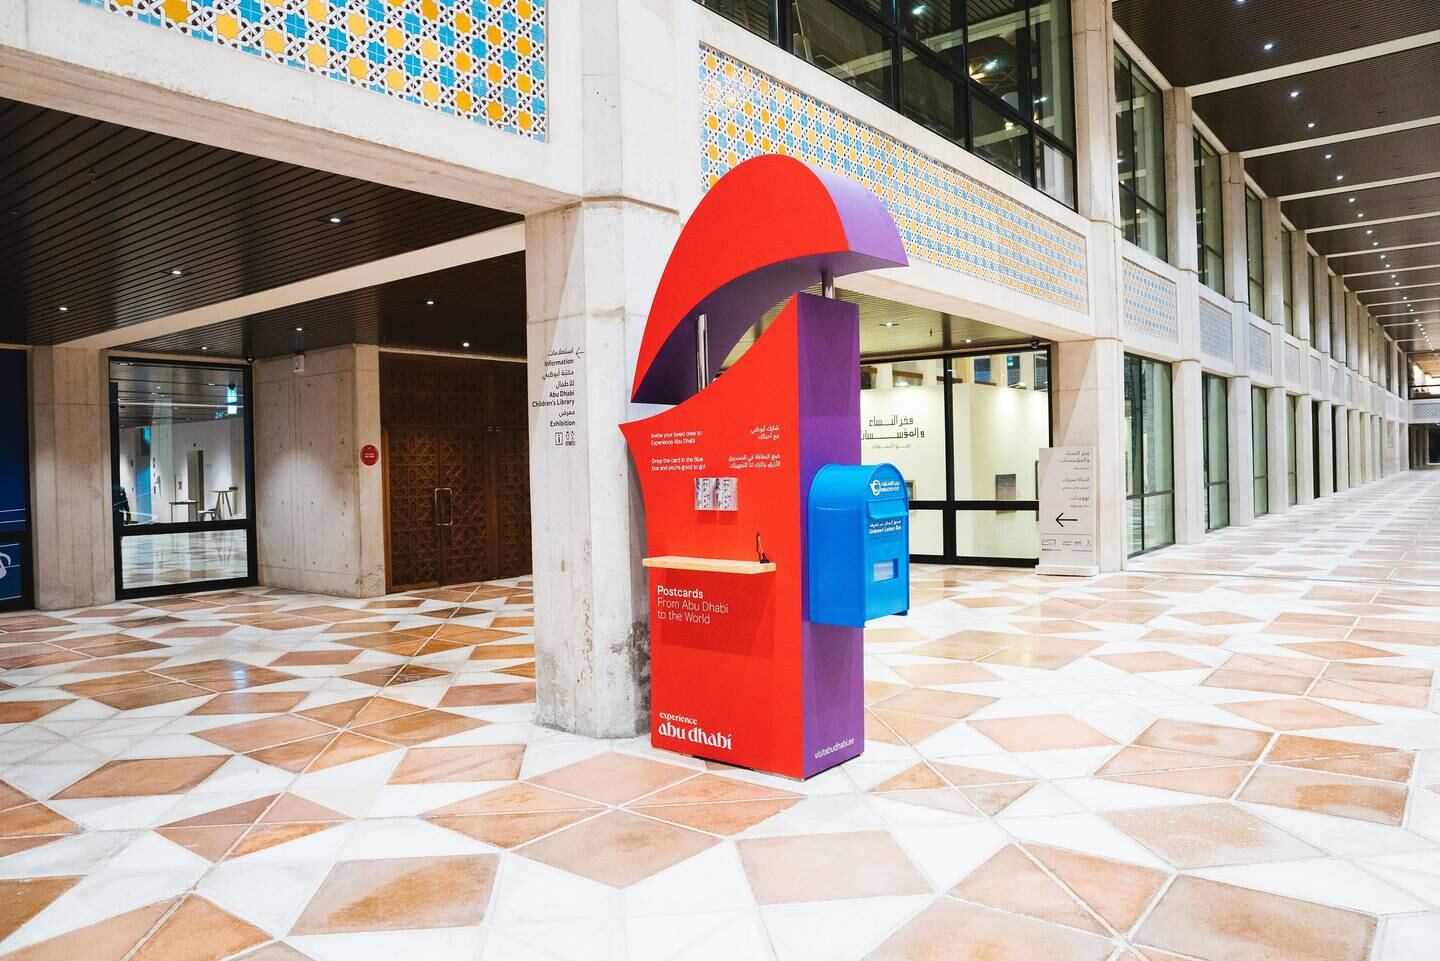 Special Experience Abu Dhabi post boxes have been set up around the city. Photo: DCT Abu Dhabi